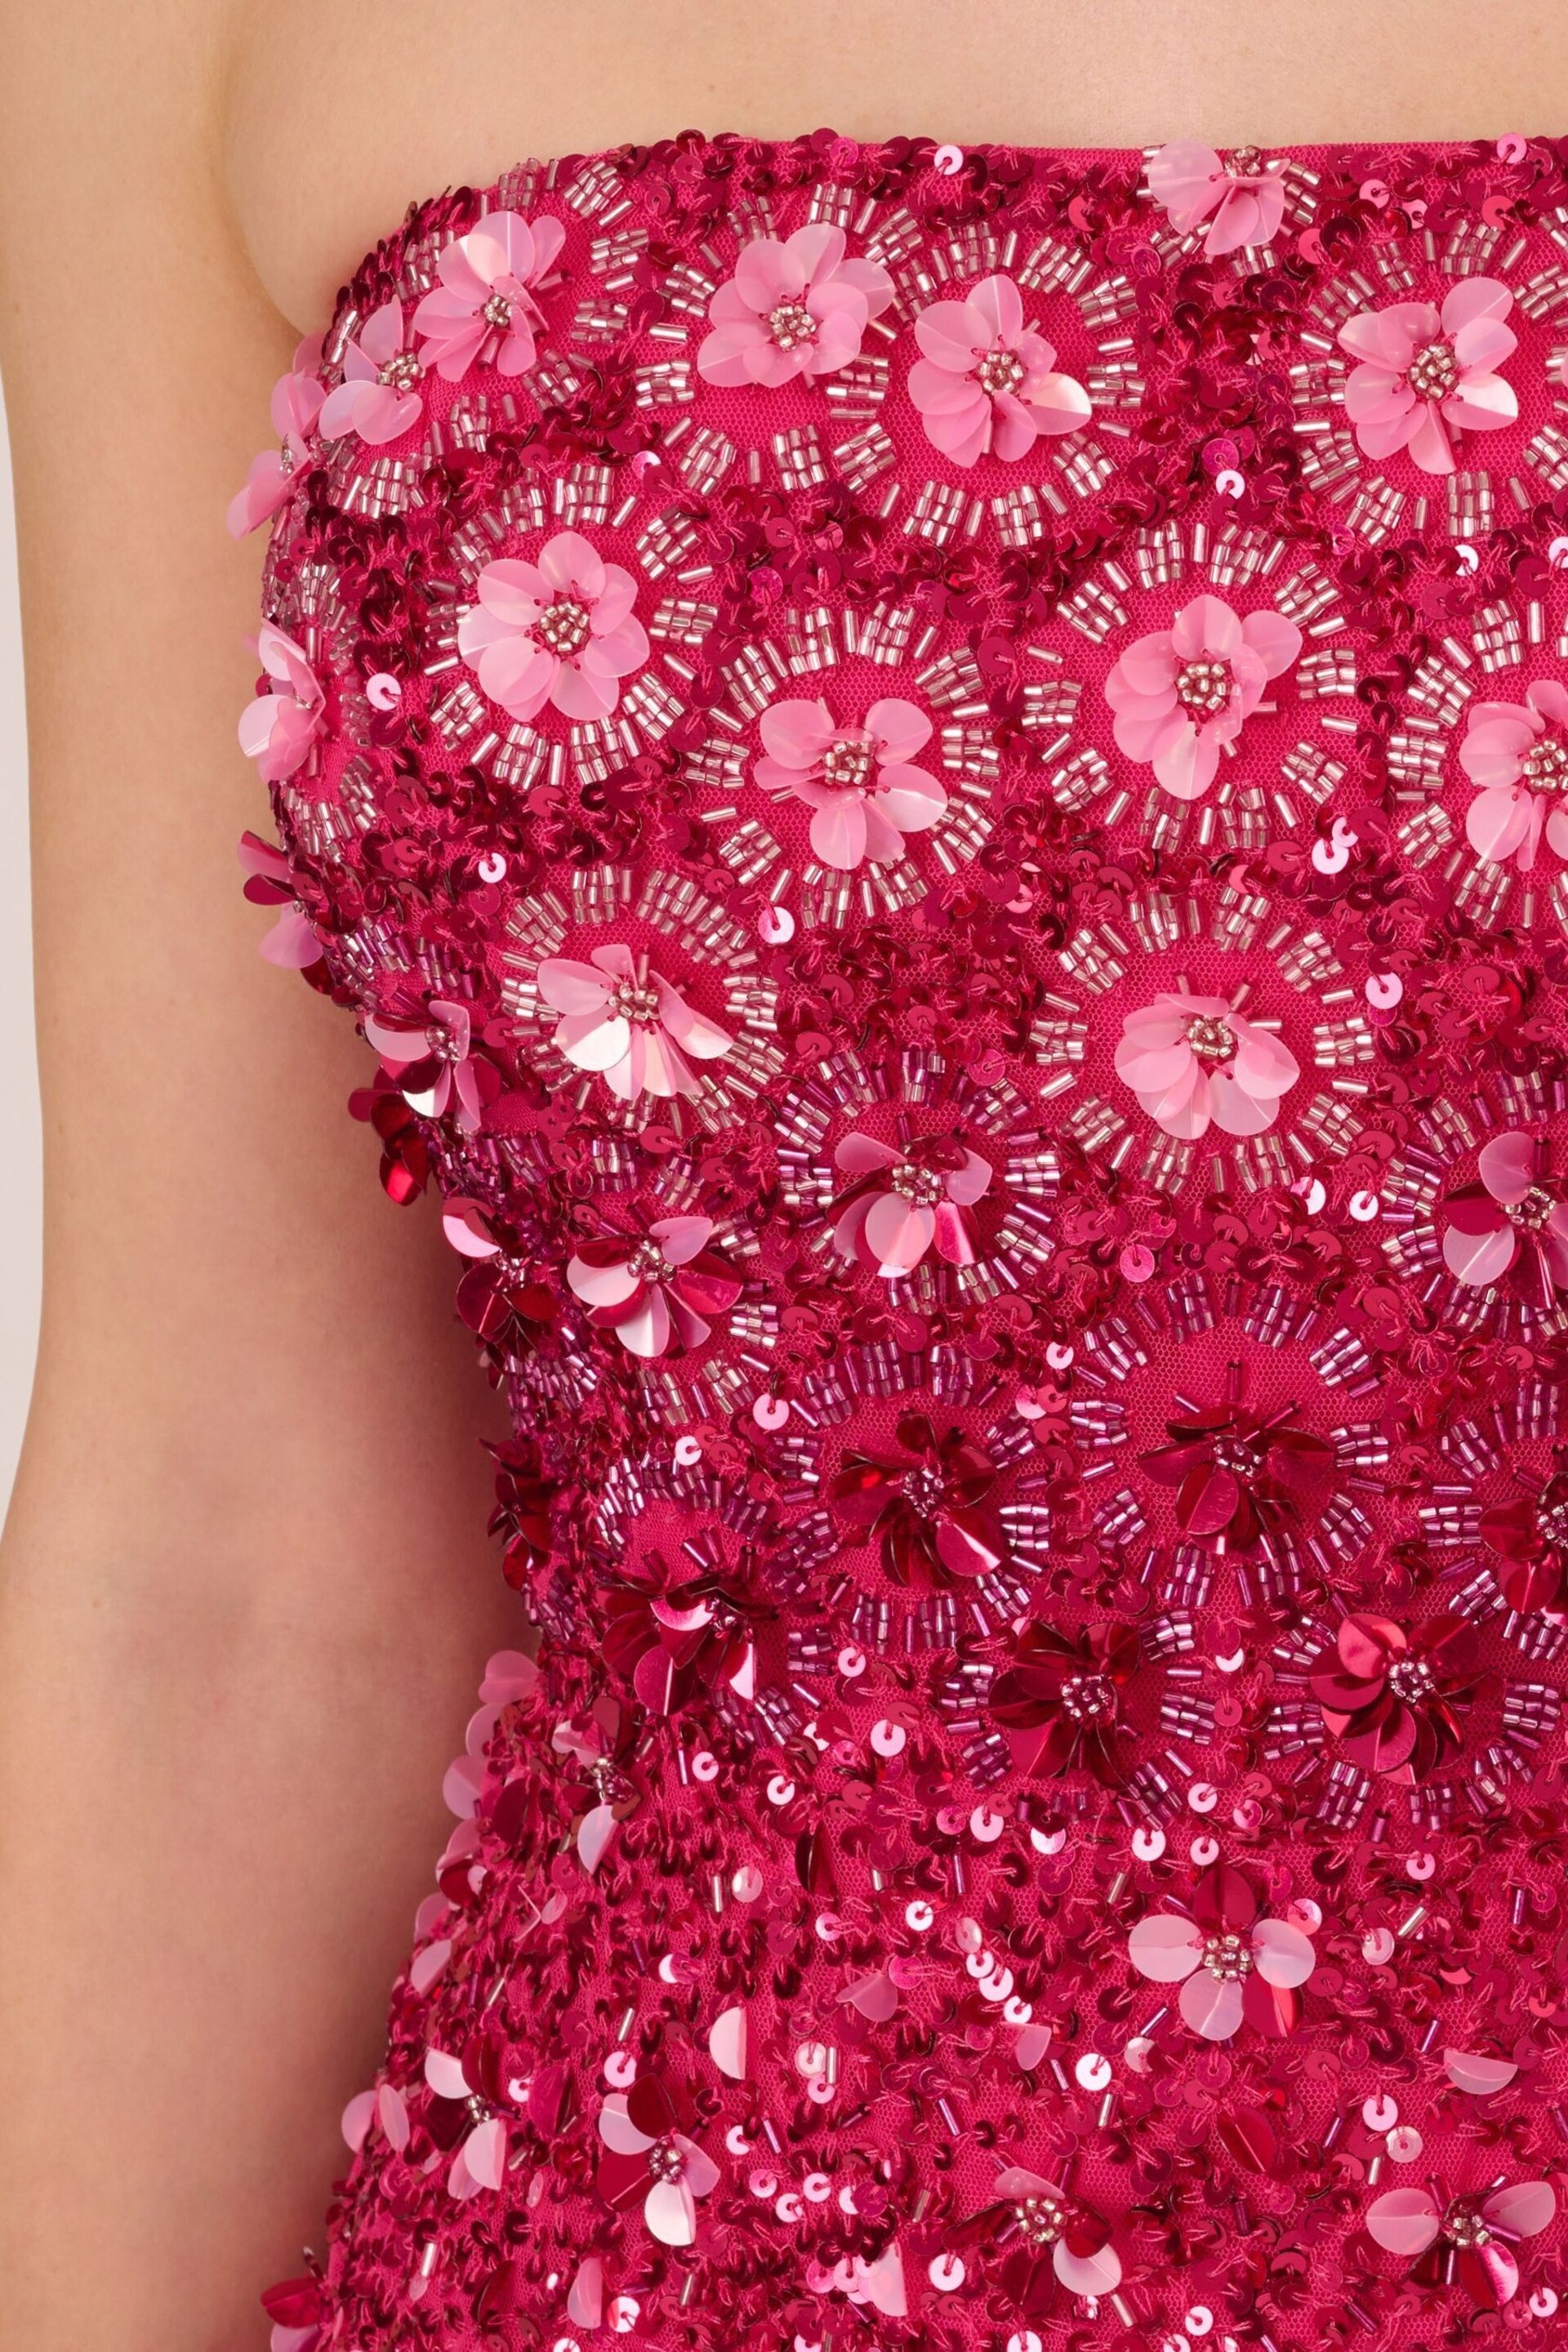 Adrianna Papell Pink Beaded Strapless Dress - Image 5 of 7